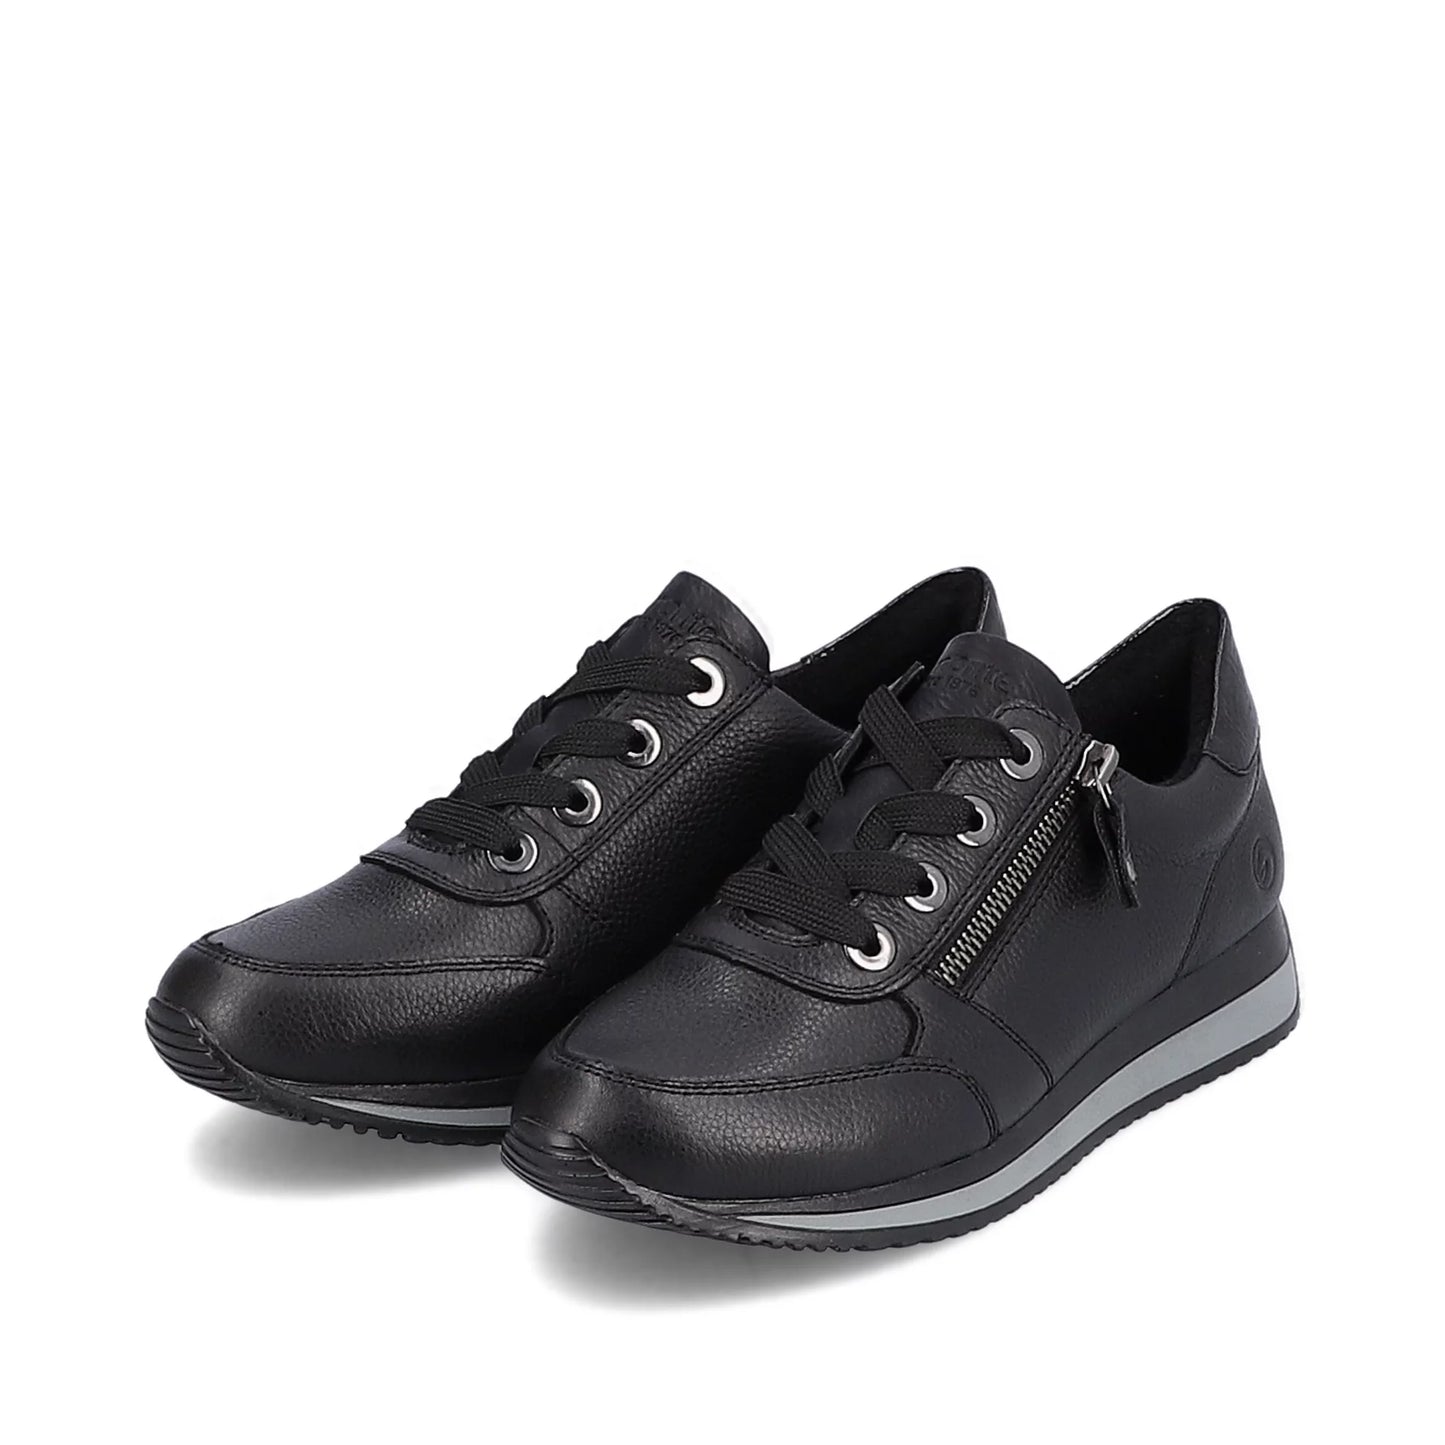 Remonte Black Leather Sneaker #D0H11-01